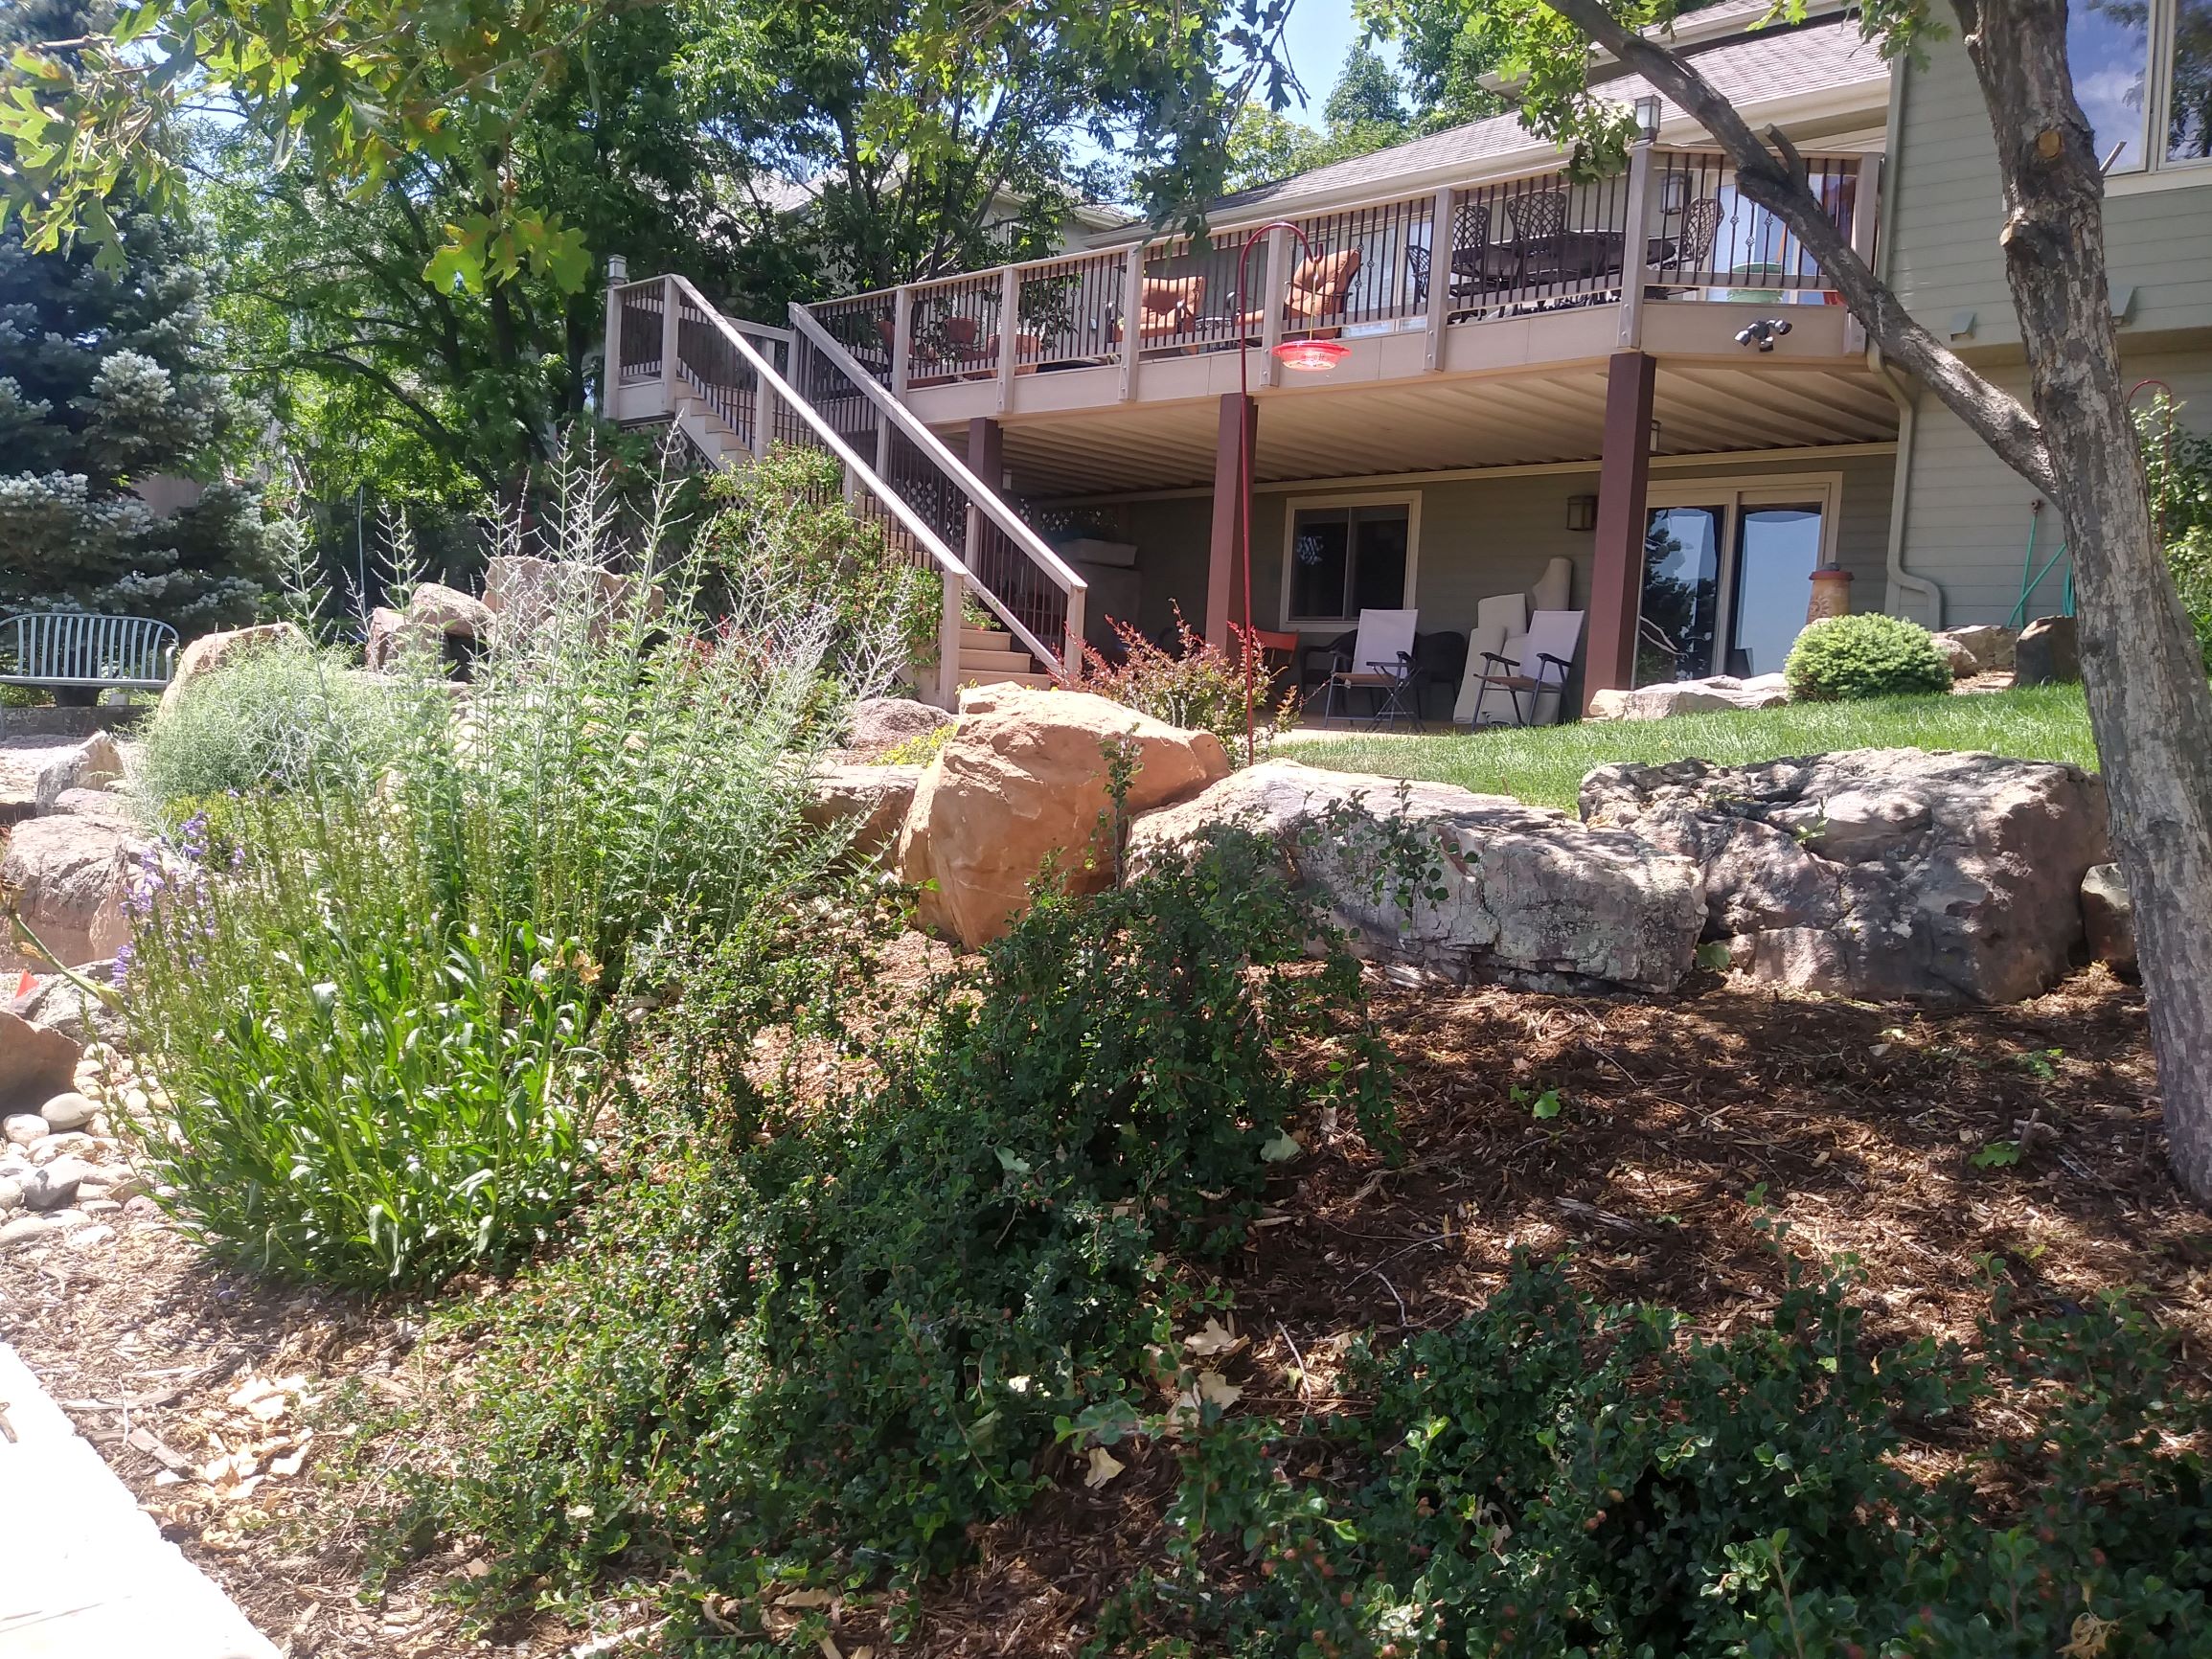 Second story deck with adjacent large rocks and plenty of bushes and plants.